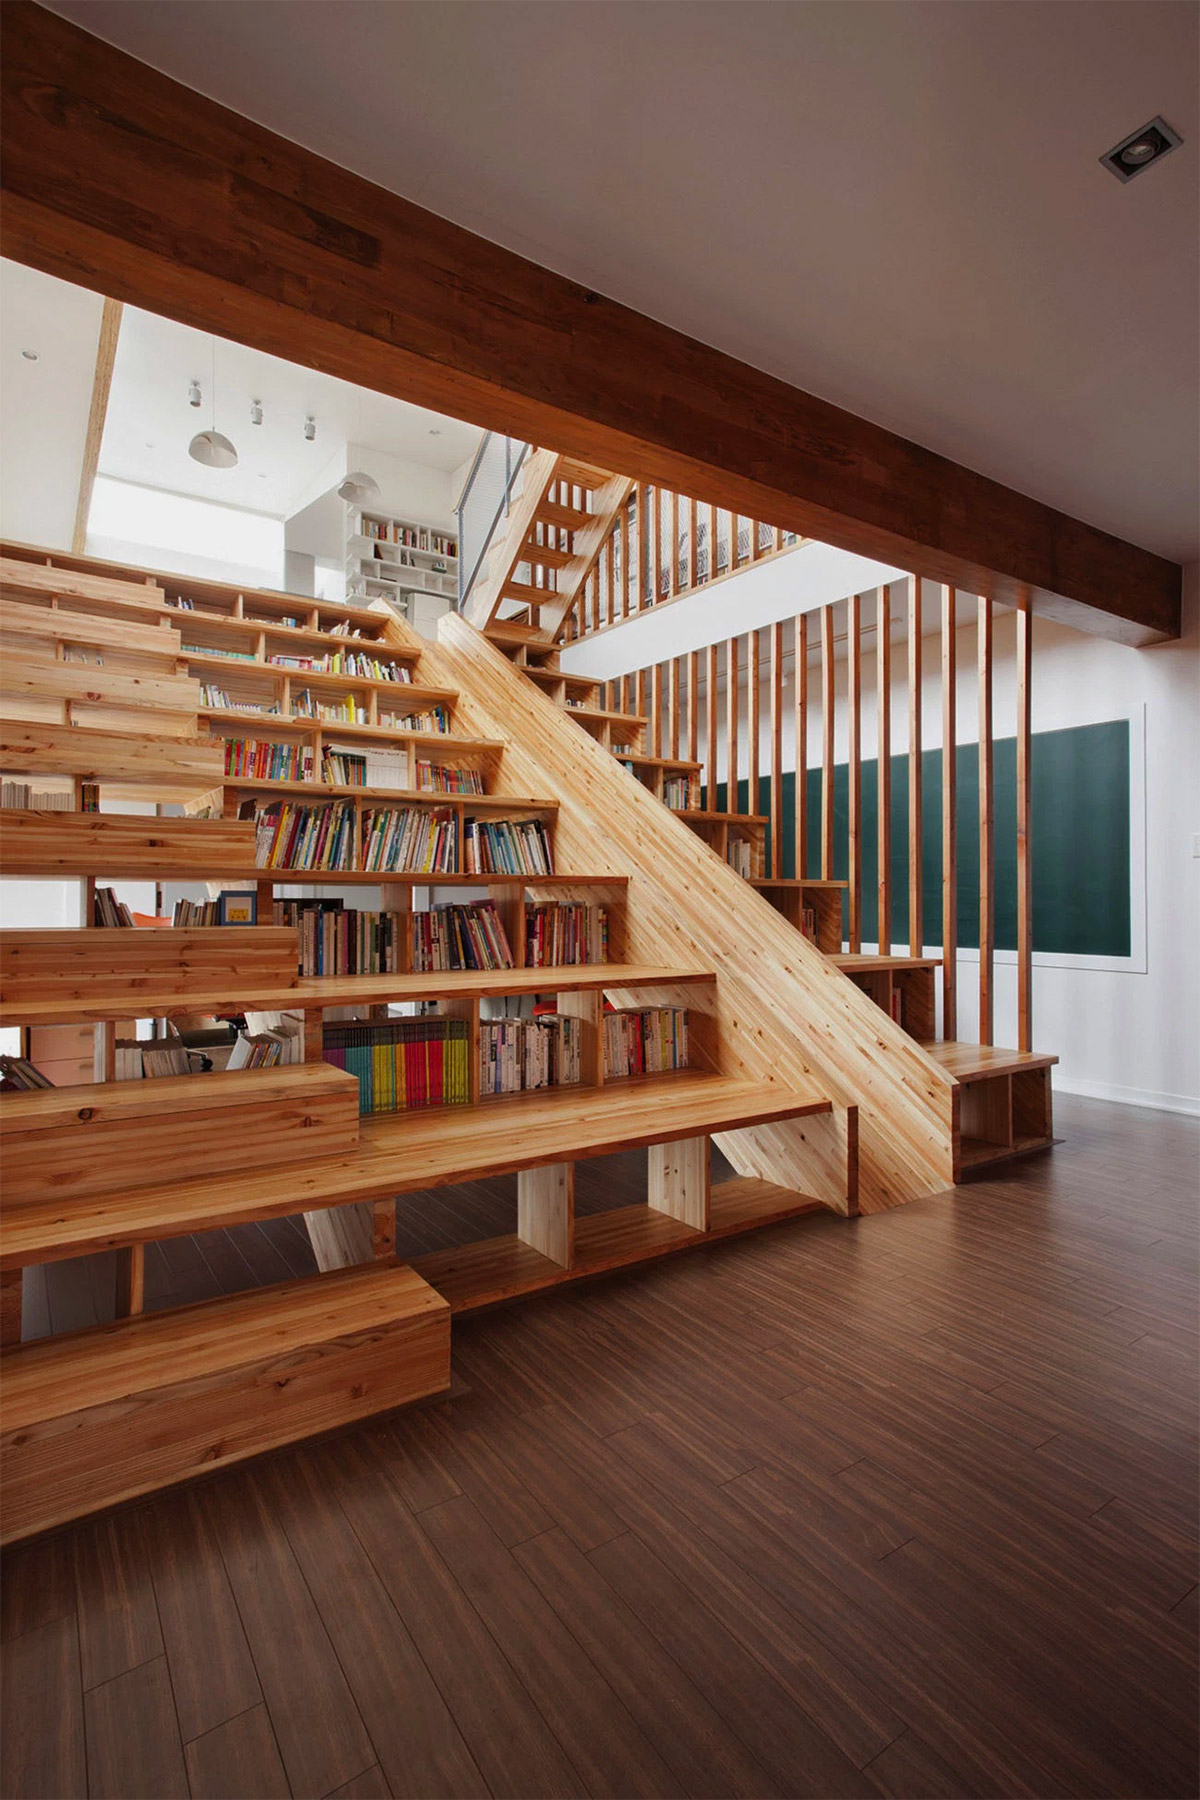 Book storage in and around stairs isn’t a new thing, but there are always new ideas on how to do it. Book lovers will adore this extensive library staircase.